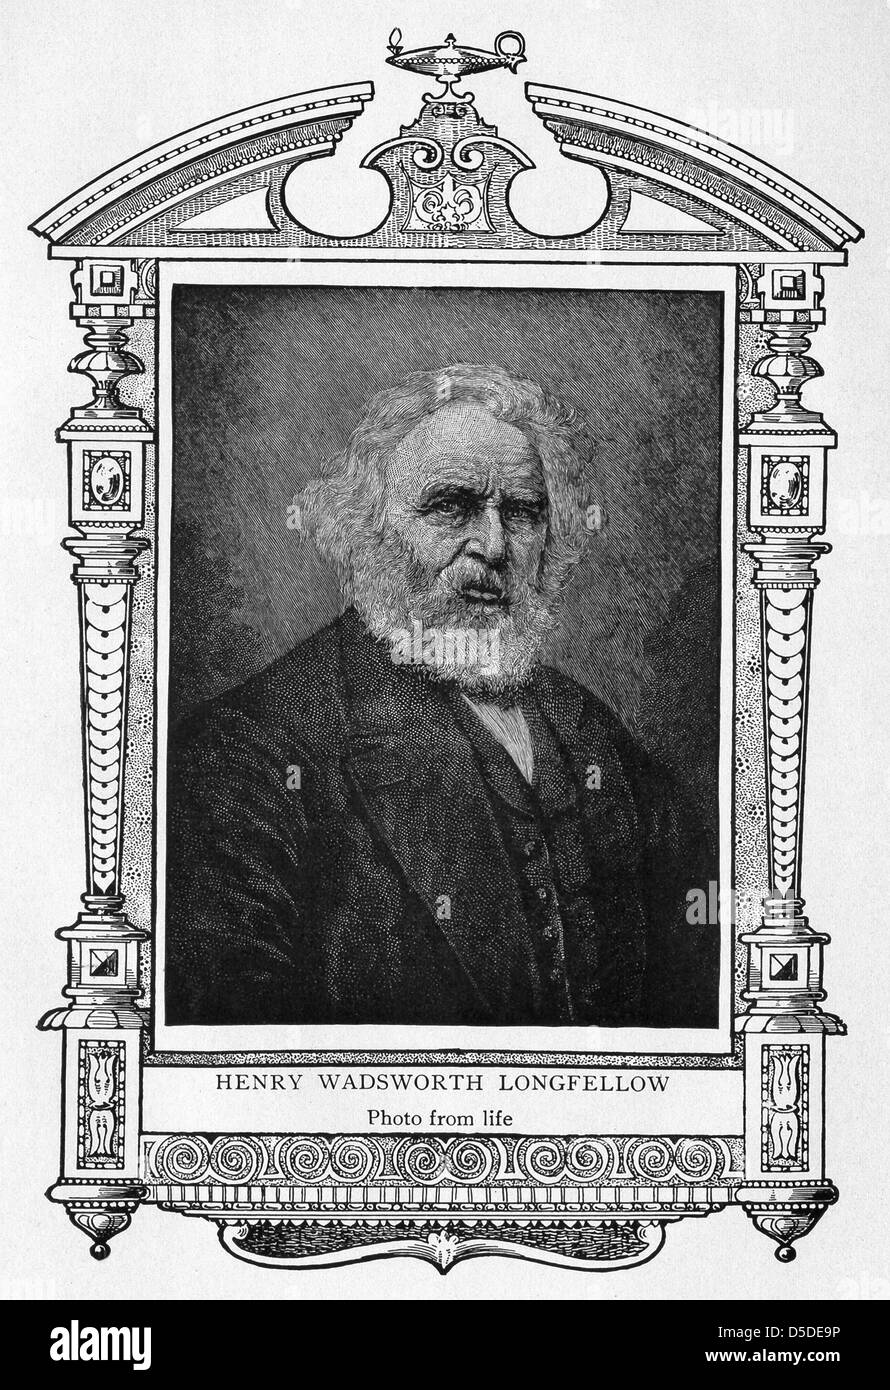 Henry Wadsworth Longfellow, an American poet and educator, wrote Paul Revere's Ride, Hiawatha,and Evangeline. Stock Photo